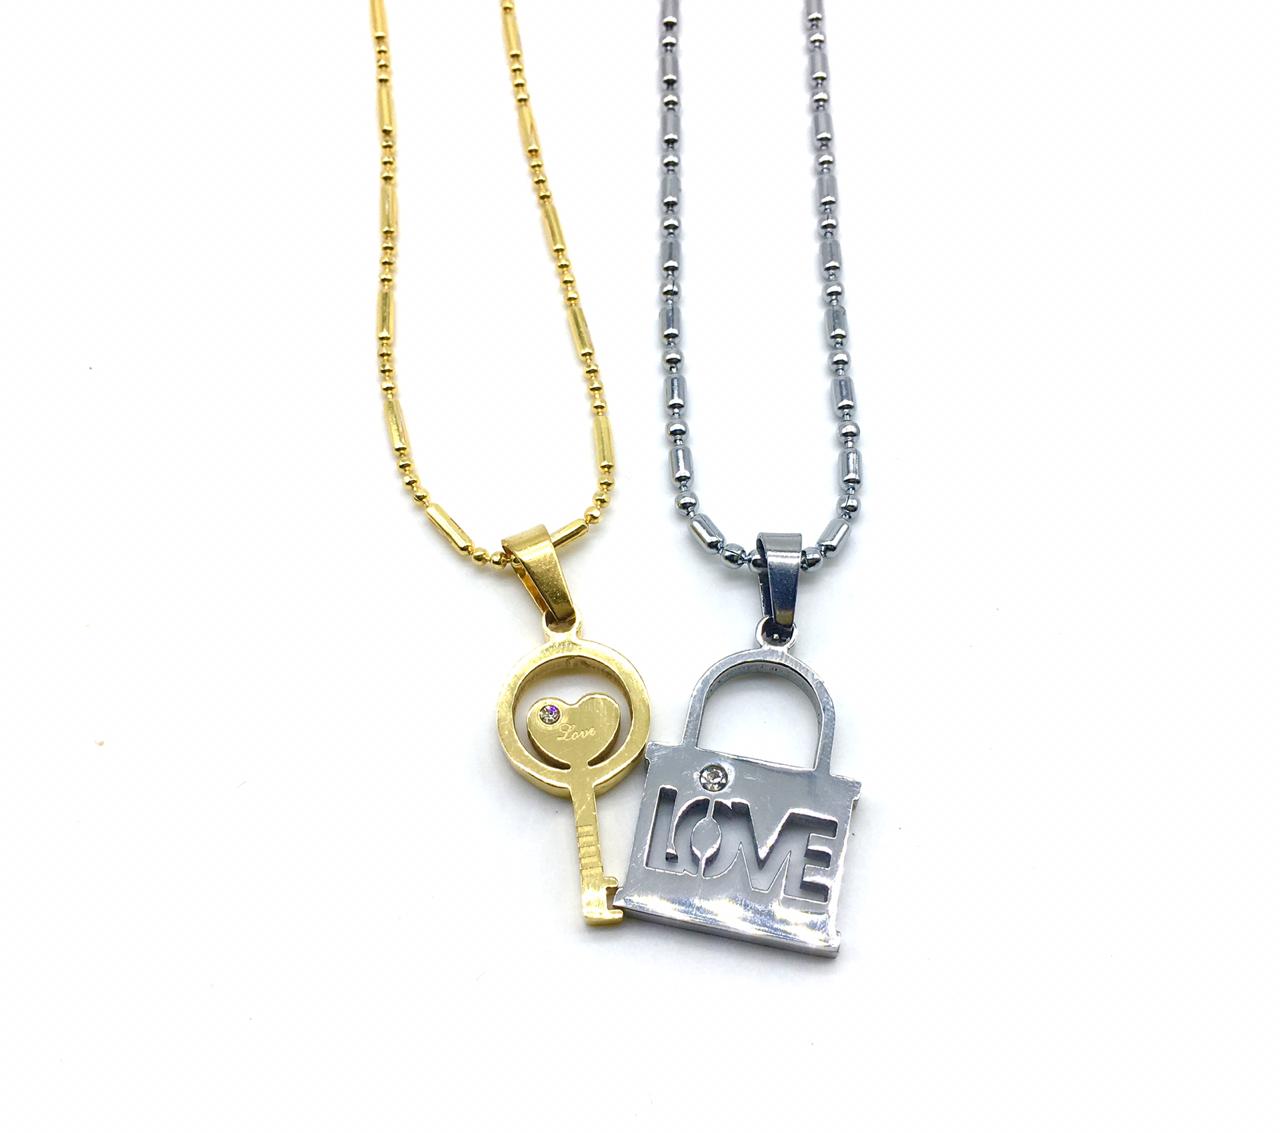 Digital Dress Room Valentine's Day For His And Her Necklaces Love Couples Accessories 2Pcs Chic Gold Silver Lock and Key Love Heart Pendant Puzzle Necklace